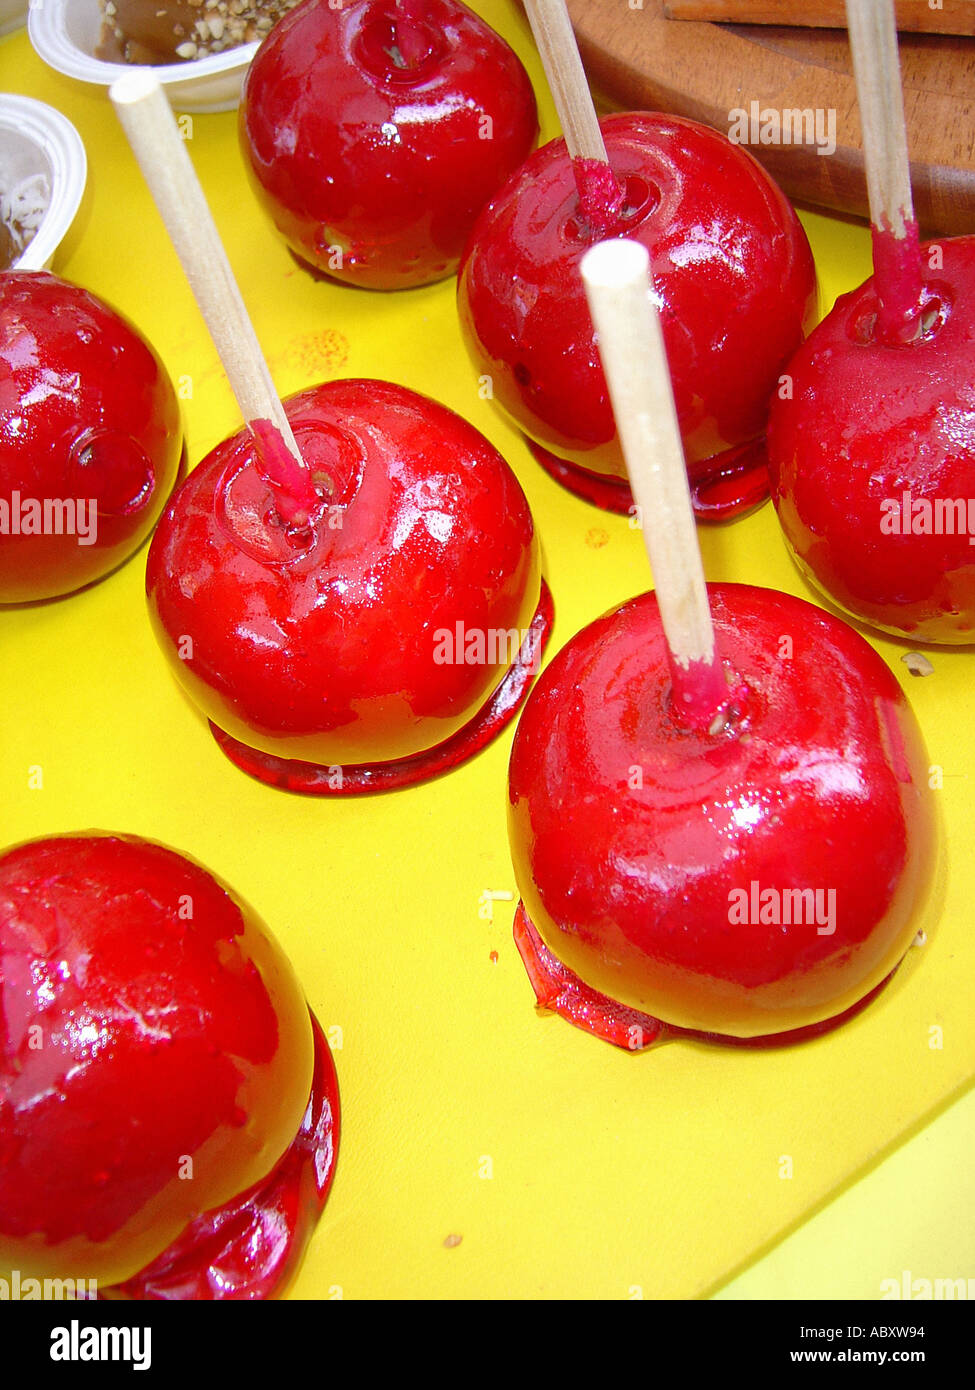 Download Still Life Of Red Candied Apples On A Yellow Tray Stock Photo Alamy Yellowimages Mockups